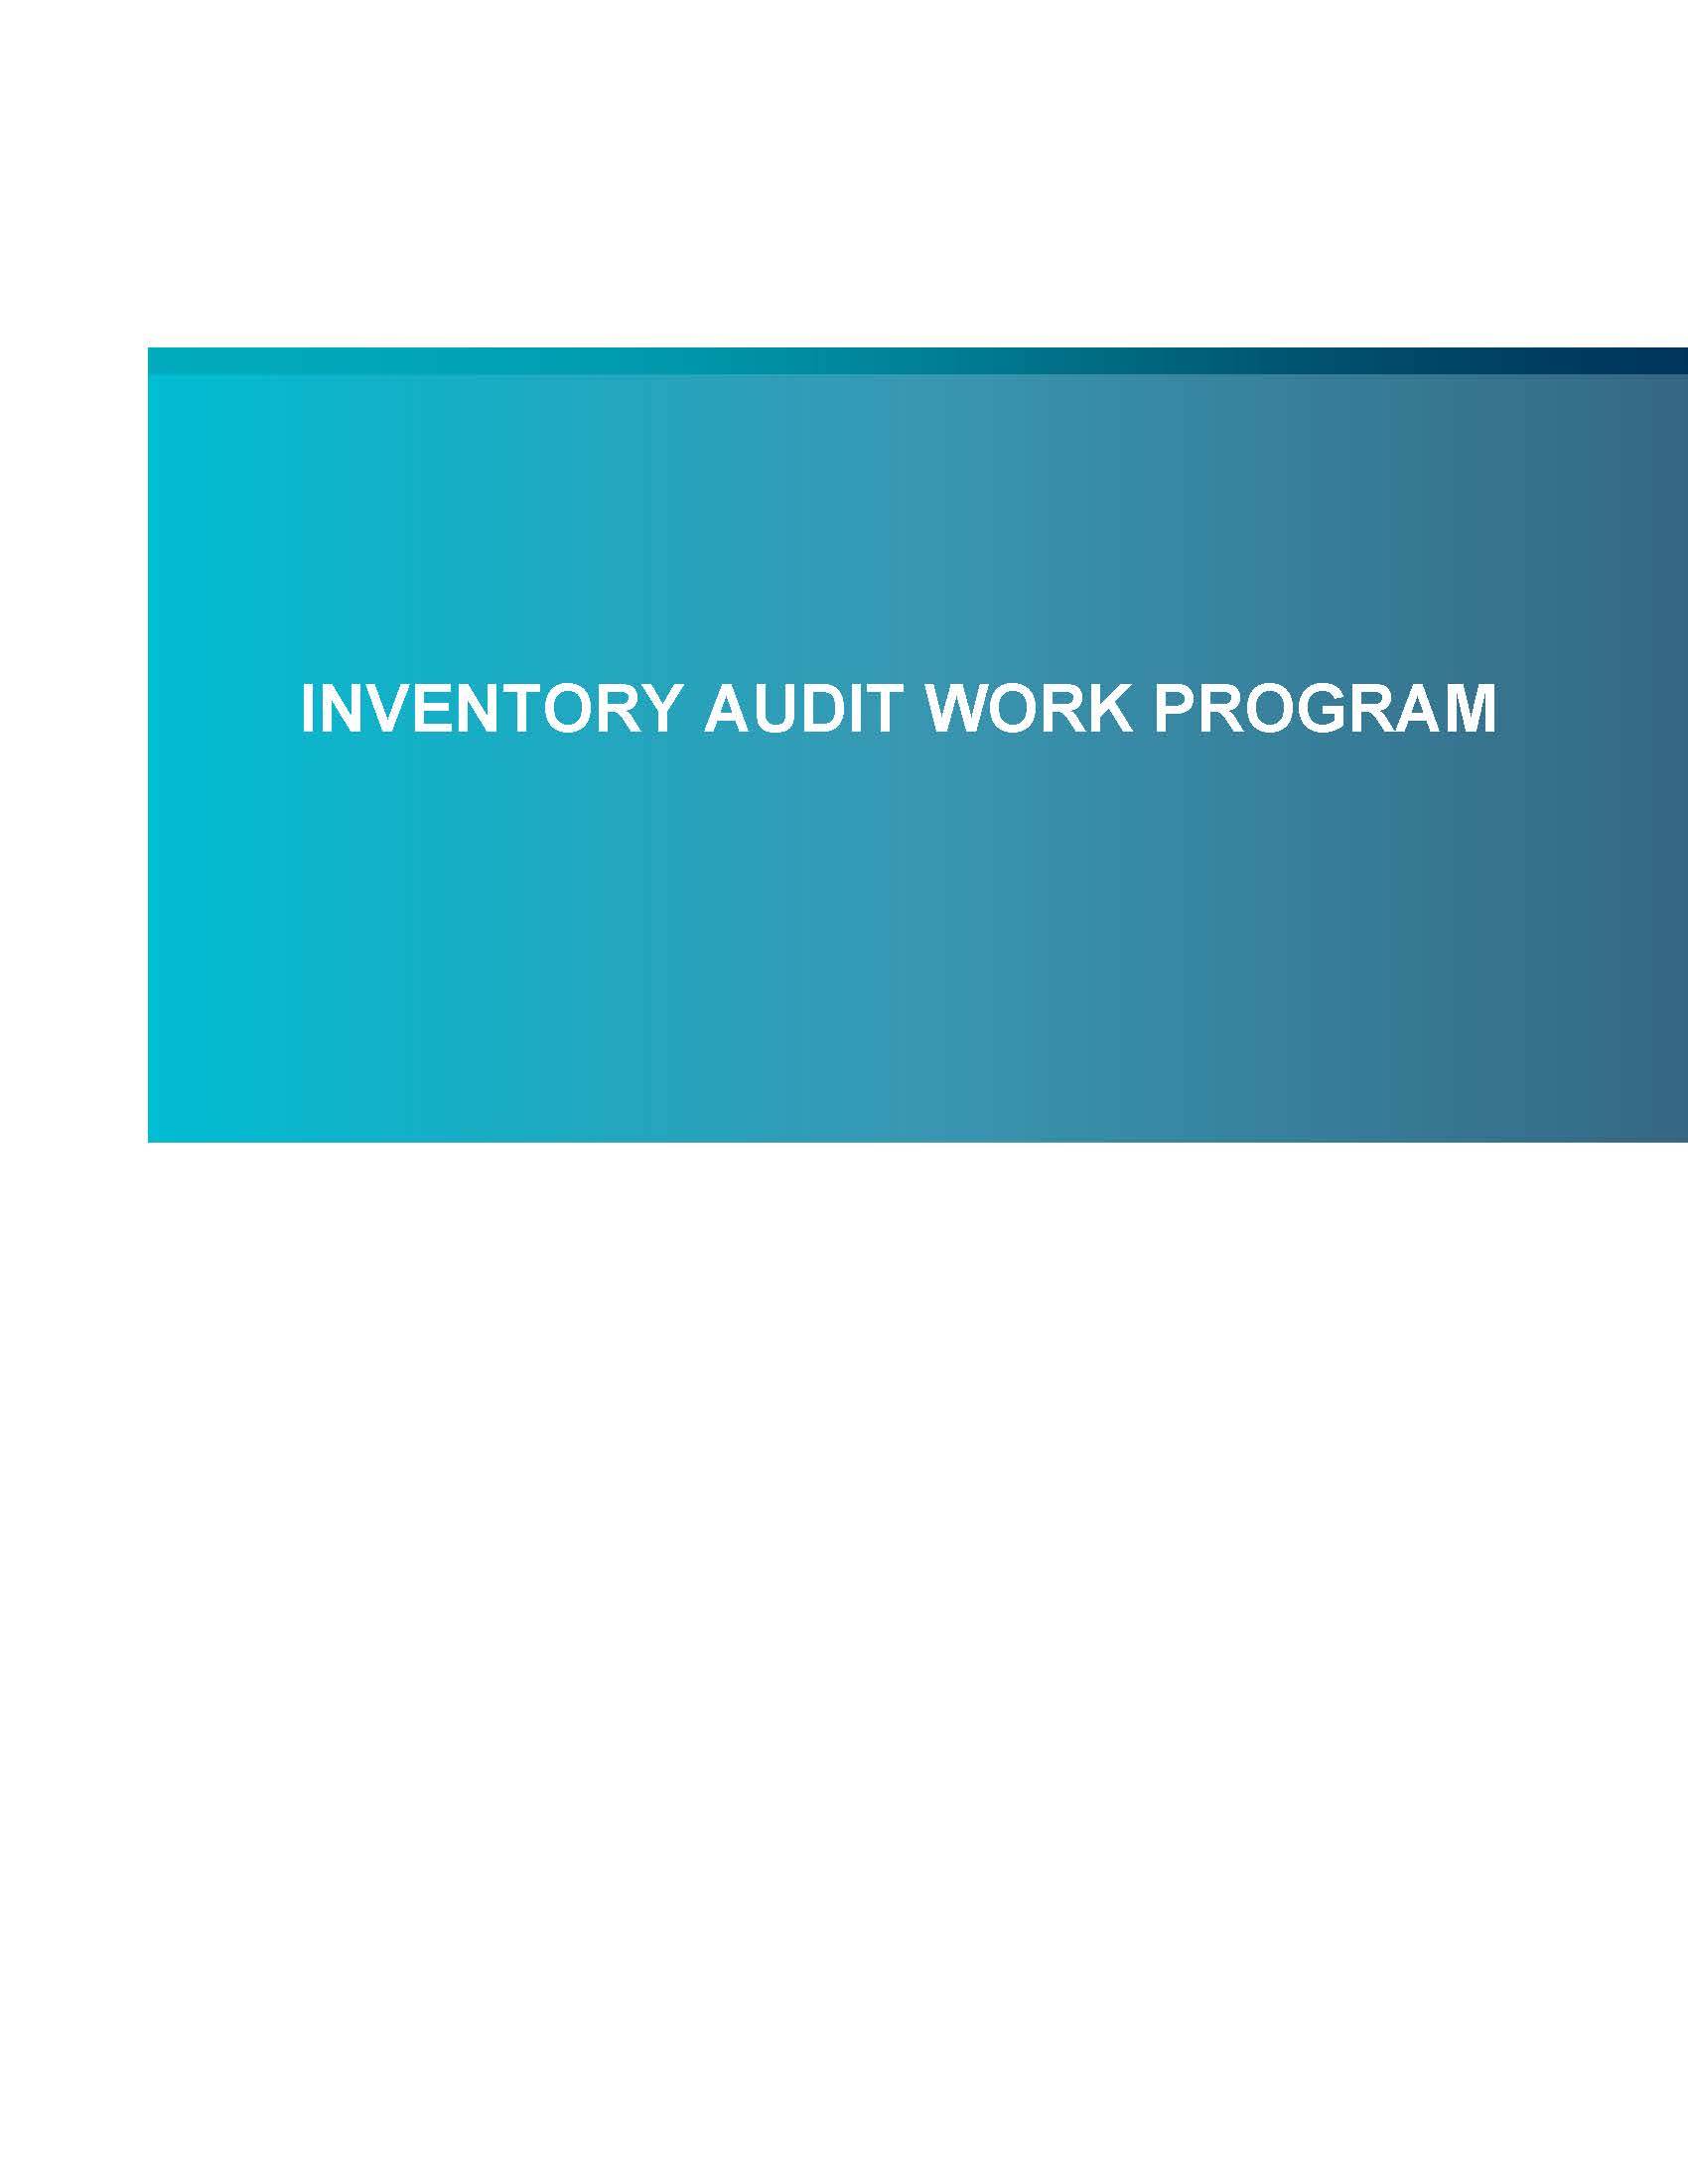 Screenshot of the first page of Inventory Audit Work Program